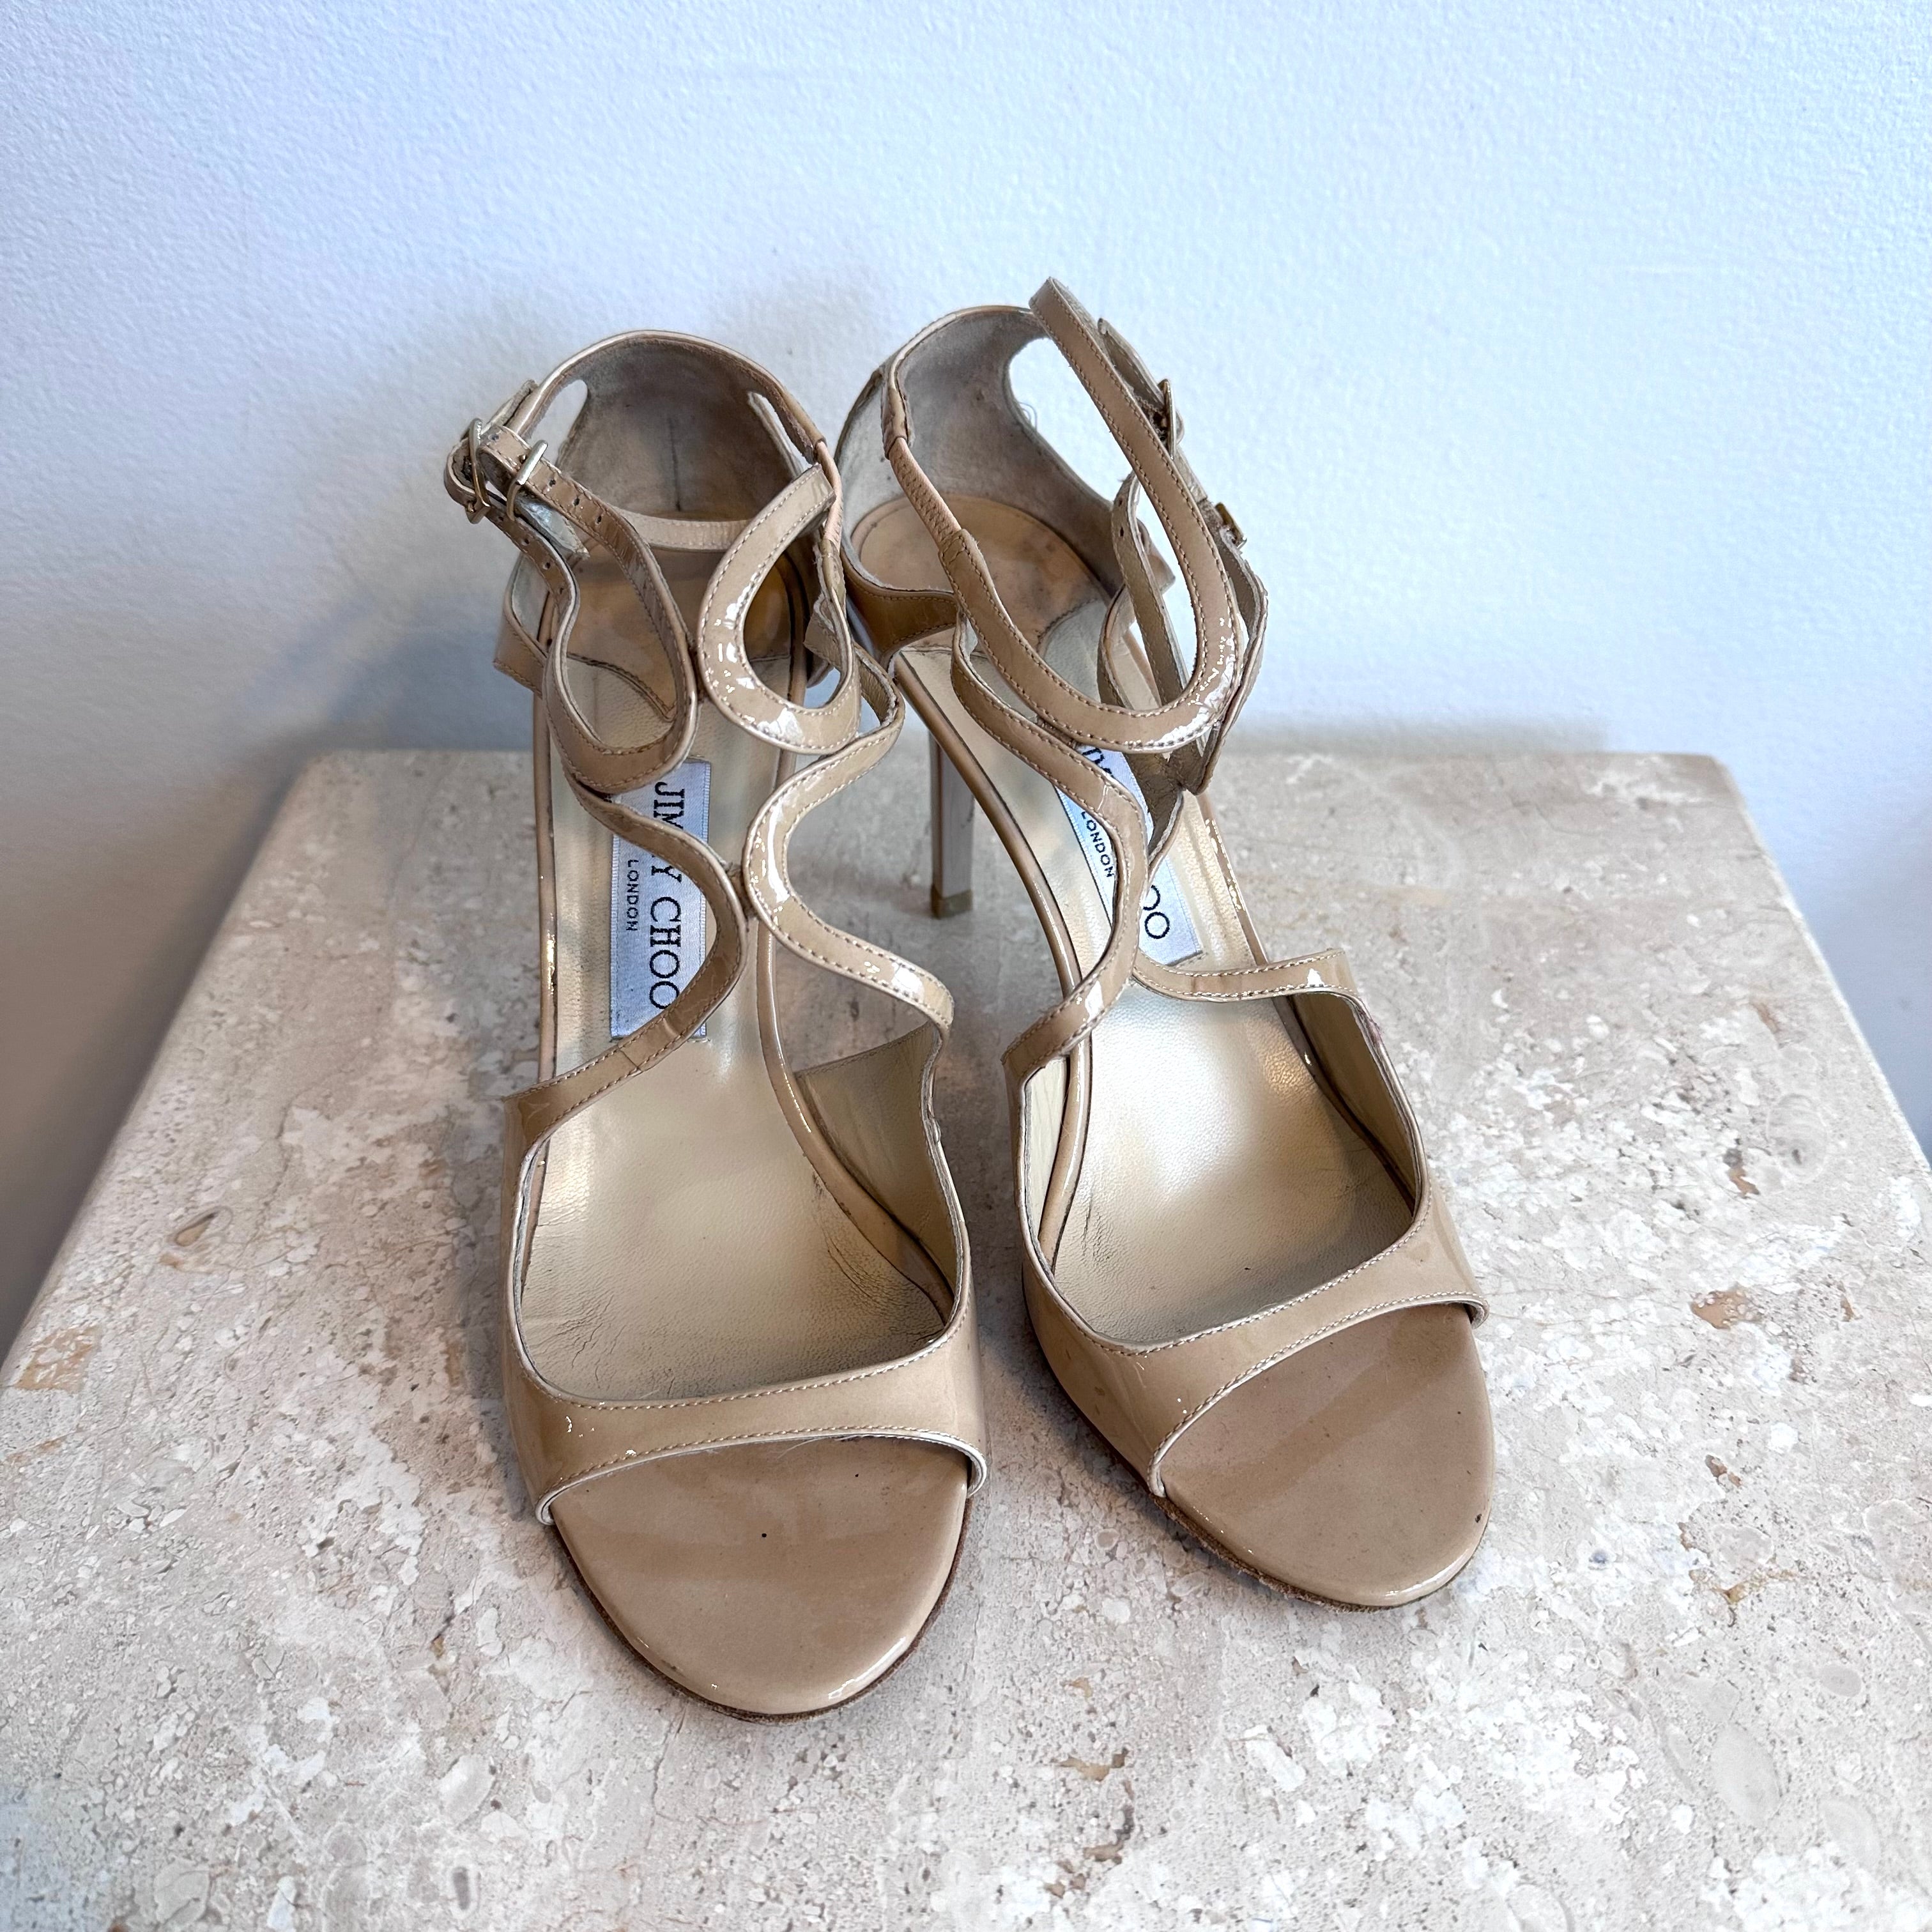 Pre-Owned JIMMY CHOO Ivettee Patent Leather Sandal Size 39